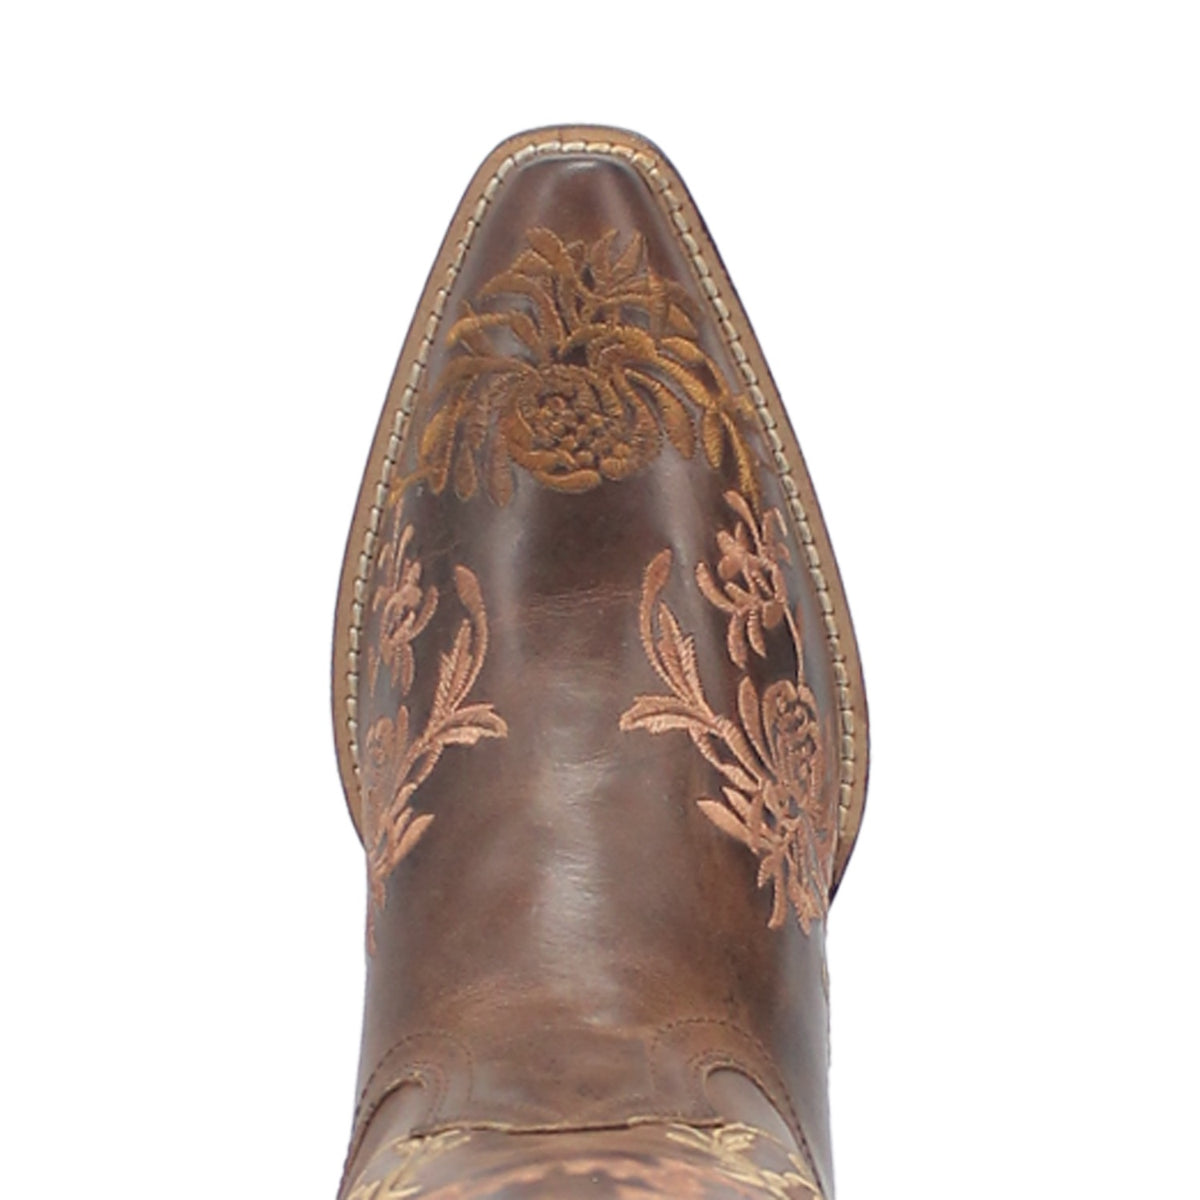 SYLVAN LEATHER BOOT Cover